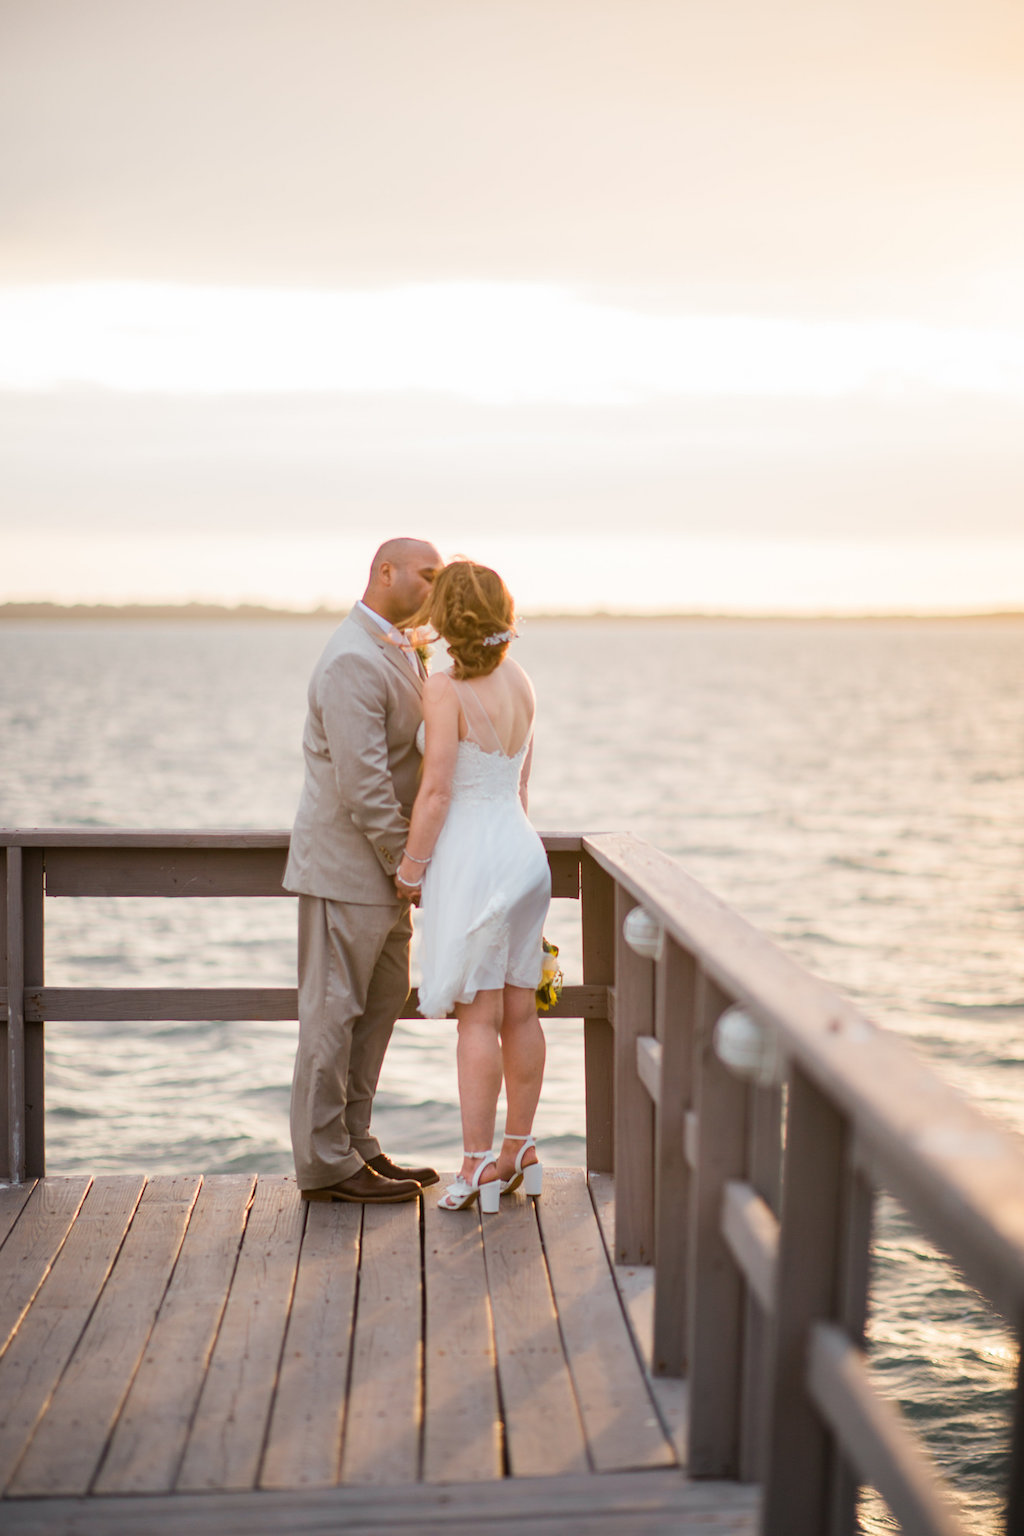 Intimate, Outdoor Sunset Waterfront Bride and Groom Wedding Portrait on Dock, Bride wearing White Tank Top Strap Short Reception Wedding Dress and Braid, Groom in Tan Suit and Blush Pink Rose Boutonniere | Dunedin Wedding Venue Beso Del Sol Resort